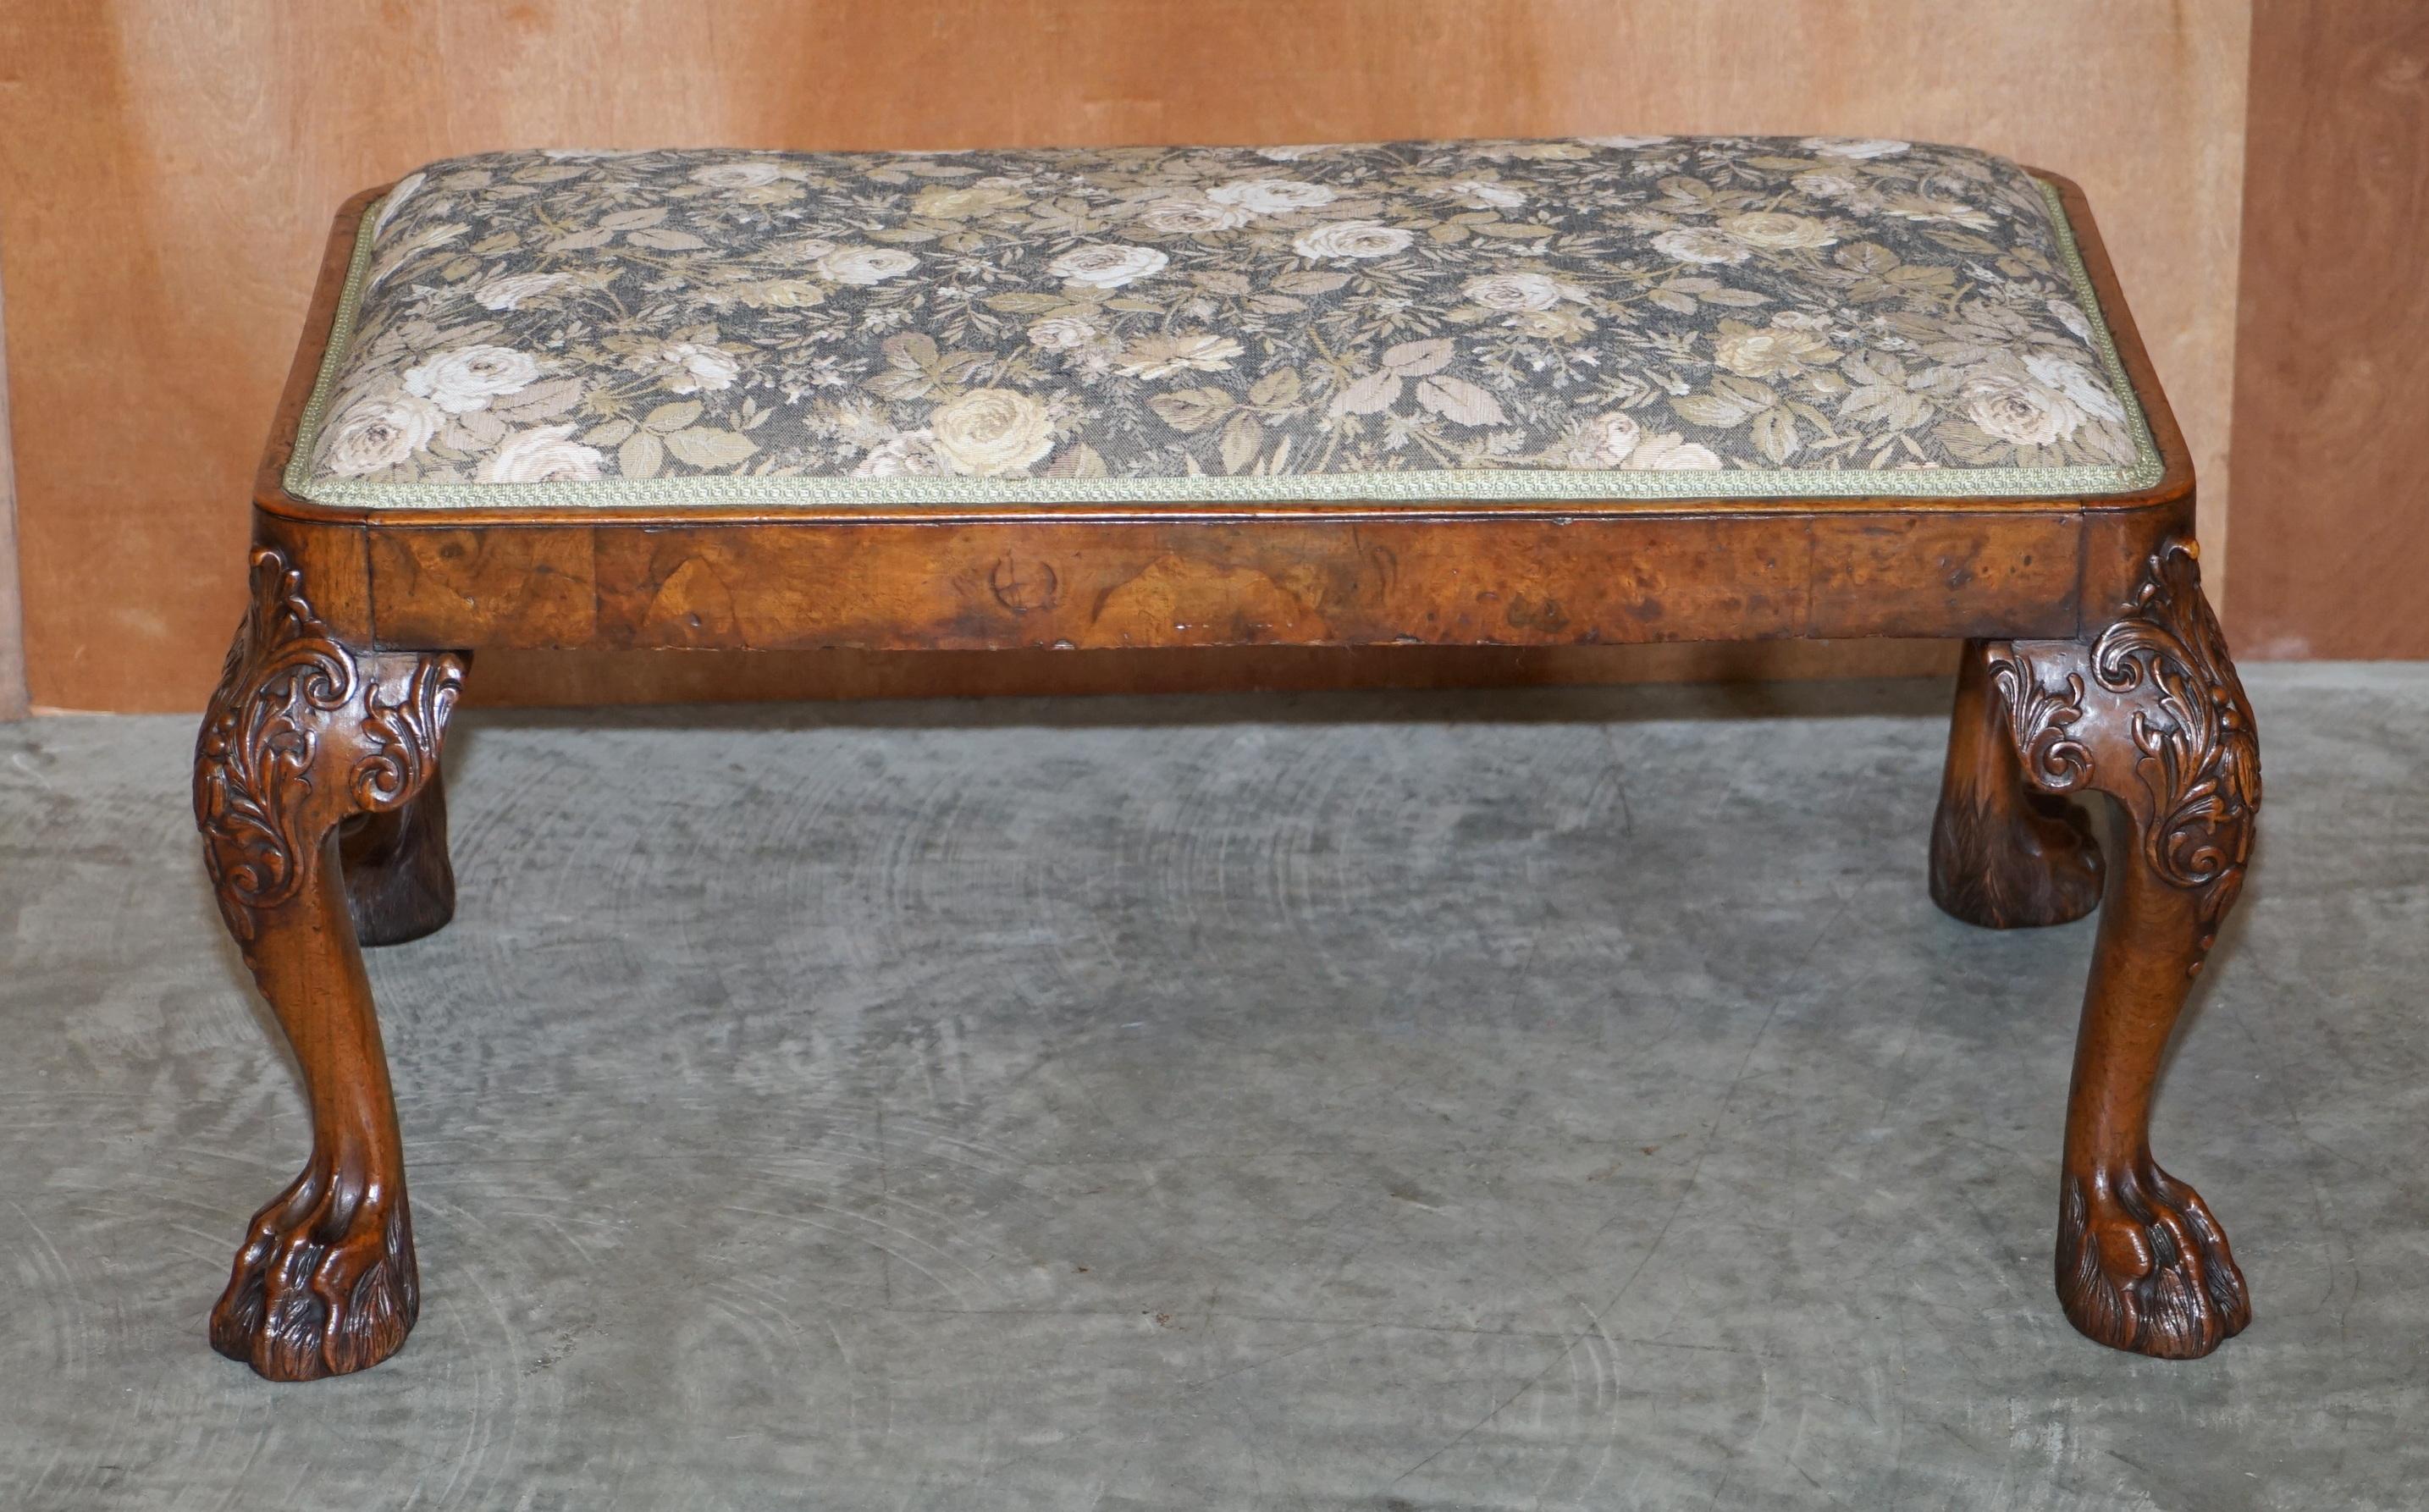 We are delighted to offer this sublime circa 1720 George I burr walnut bench stool with ornately carved legs

A very good looking well made and decorative piece with a glorious timber patina. This piece is just over 300 years old, it that time as